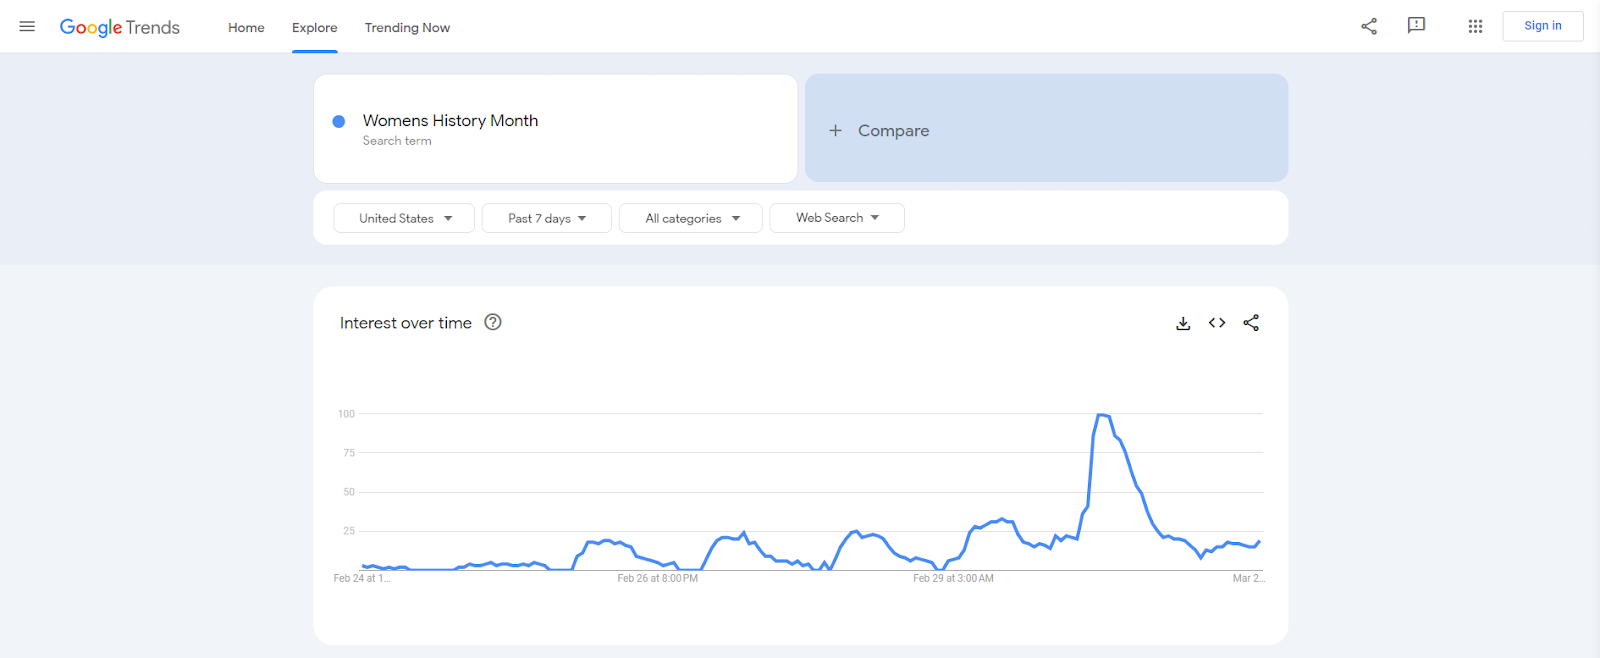 Google Trends has been the go-to free trend analysis tool for marketers and investors since 2012.